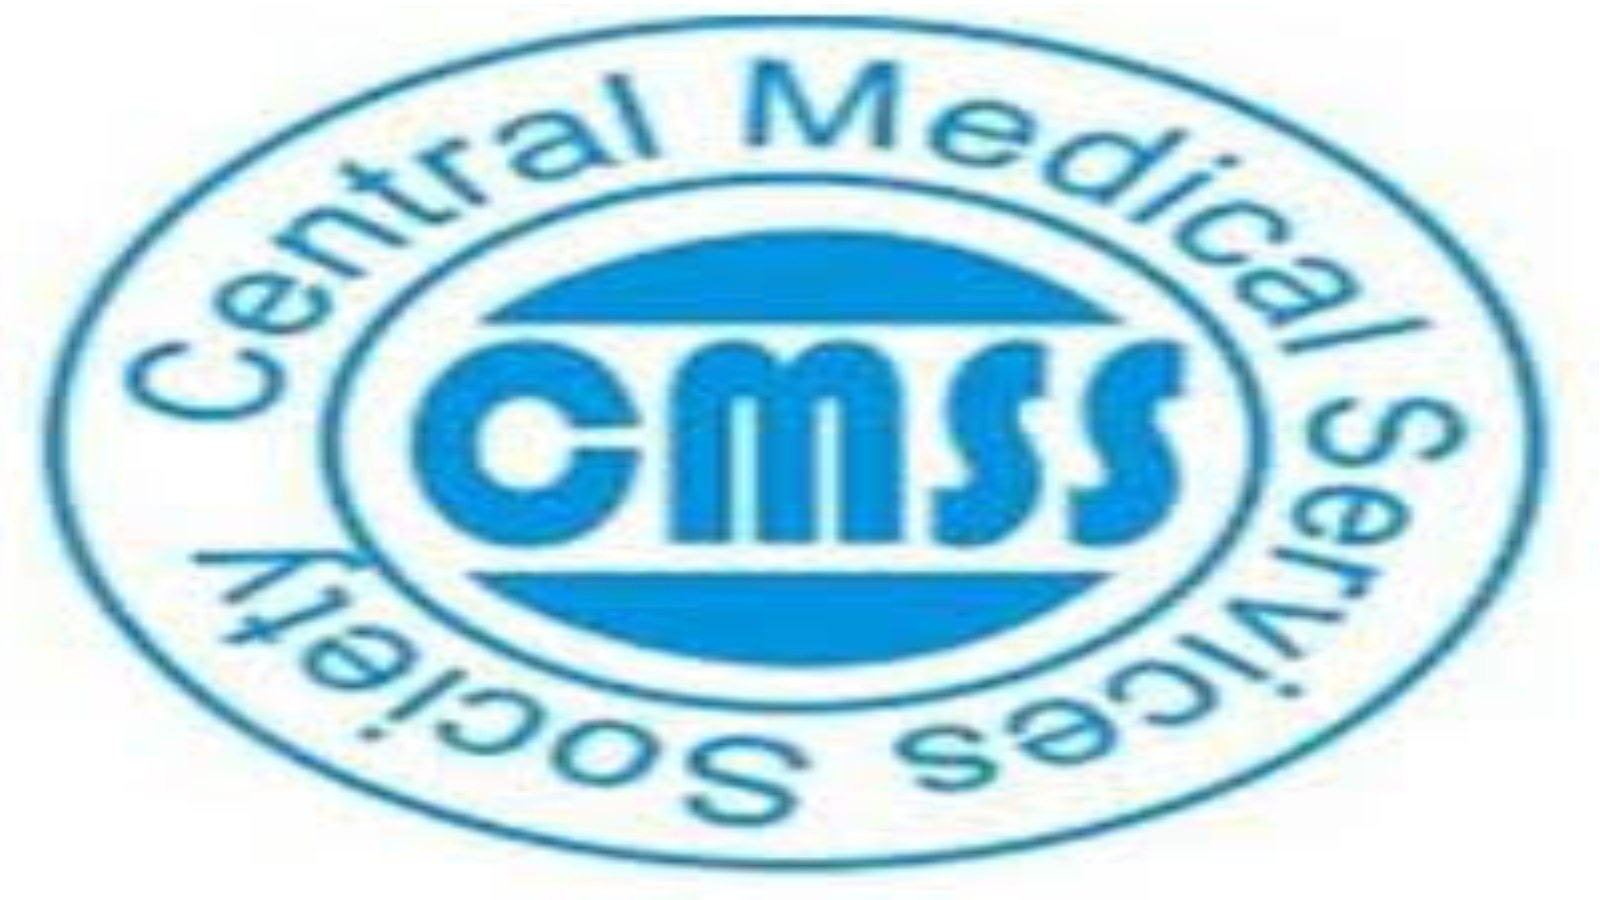 Central Medical Services Society